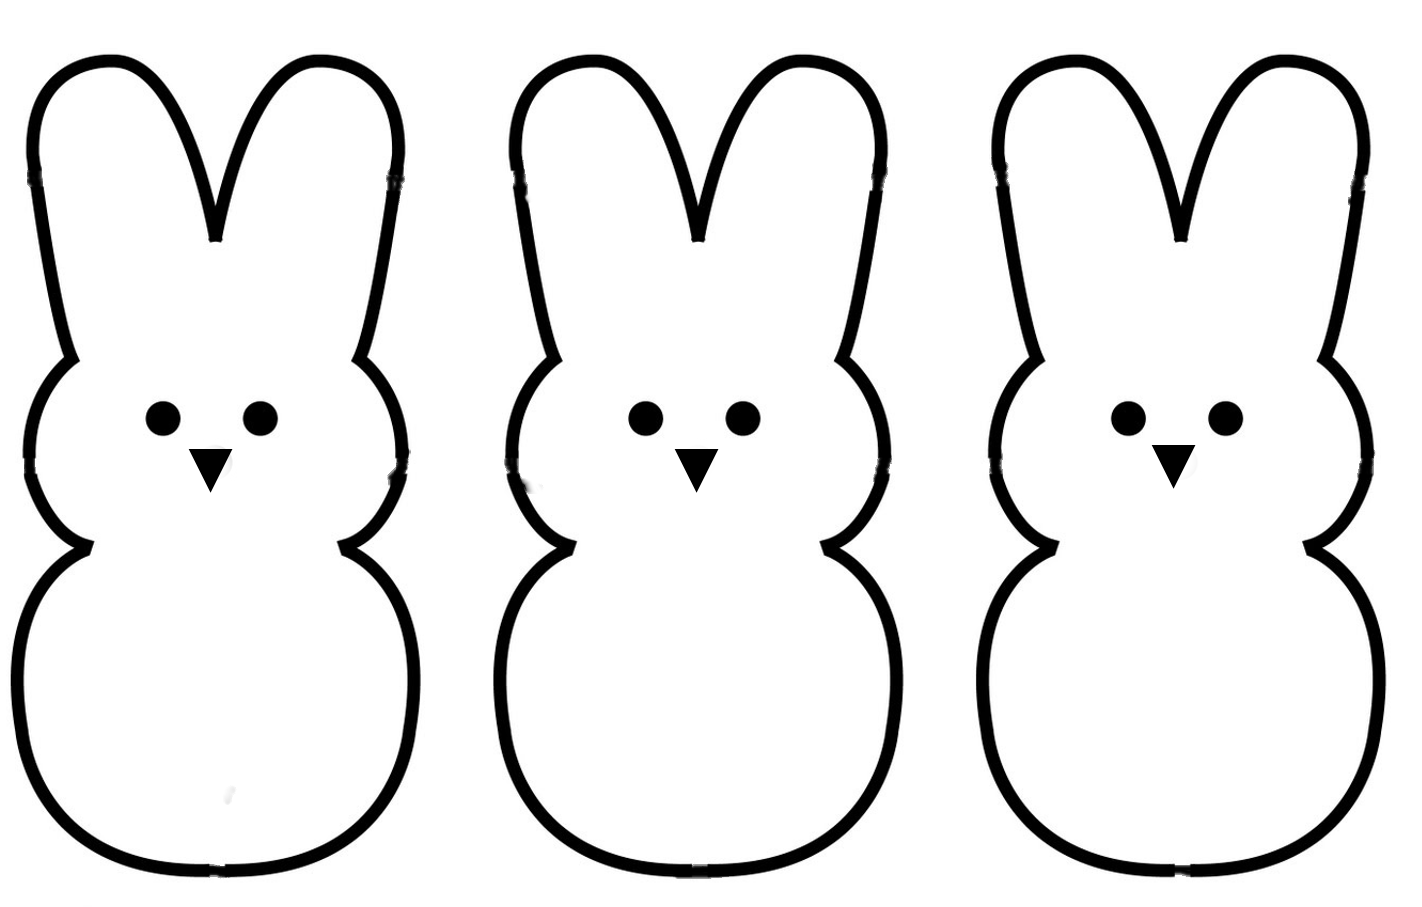 Free Rabbit Outline, Download Free Rabbit Outline png images, Free